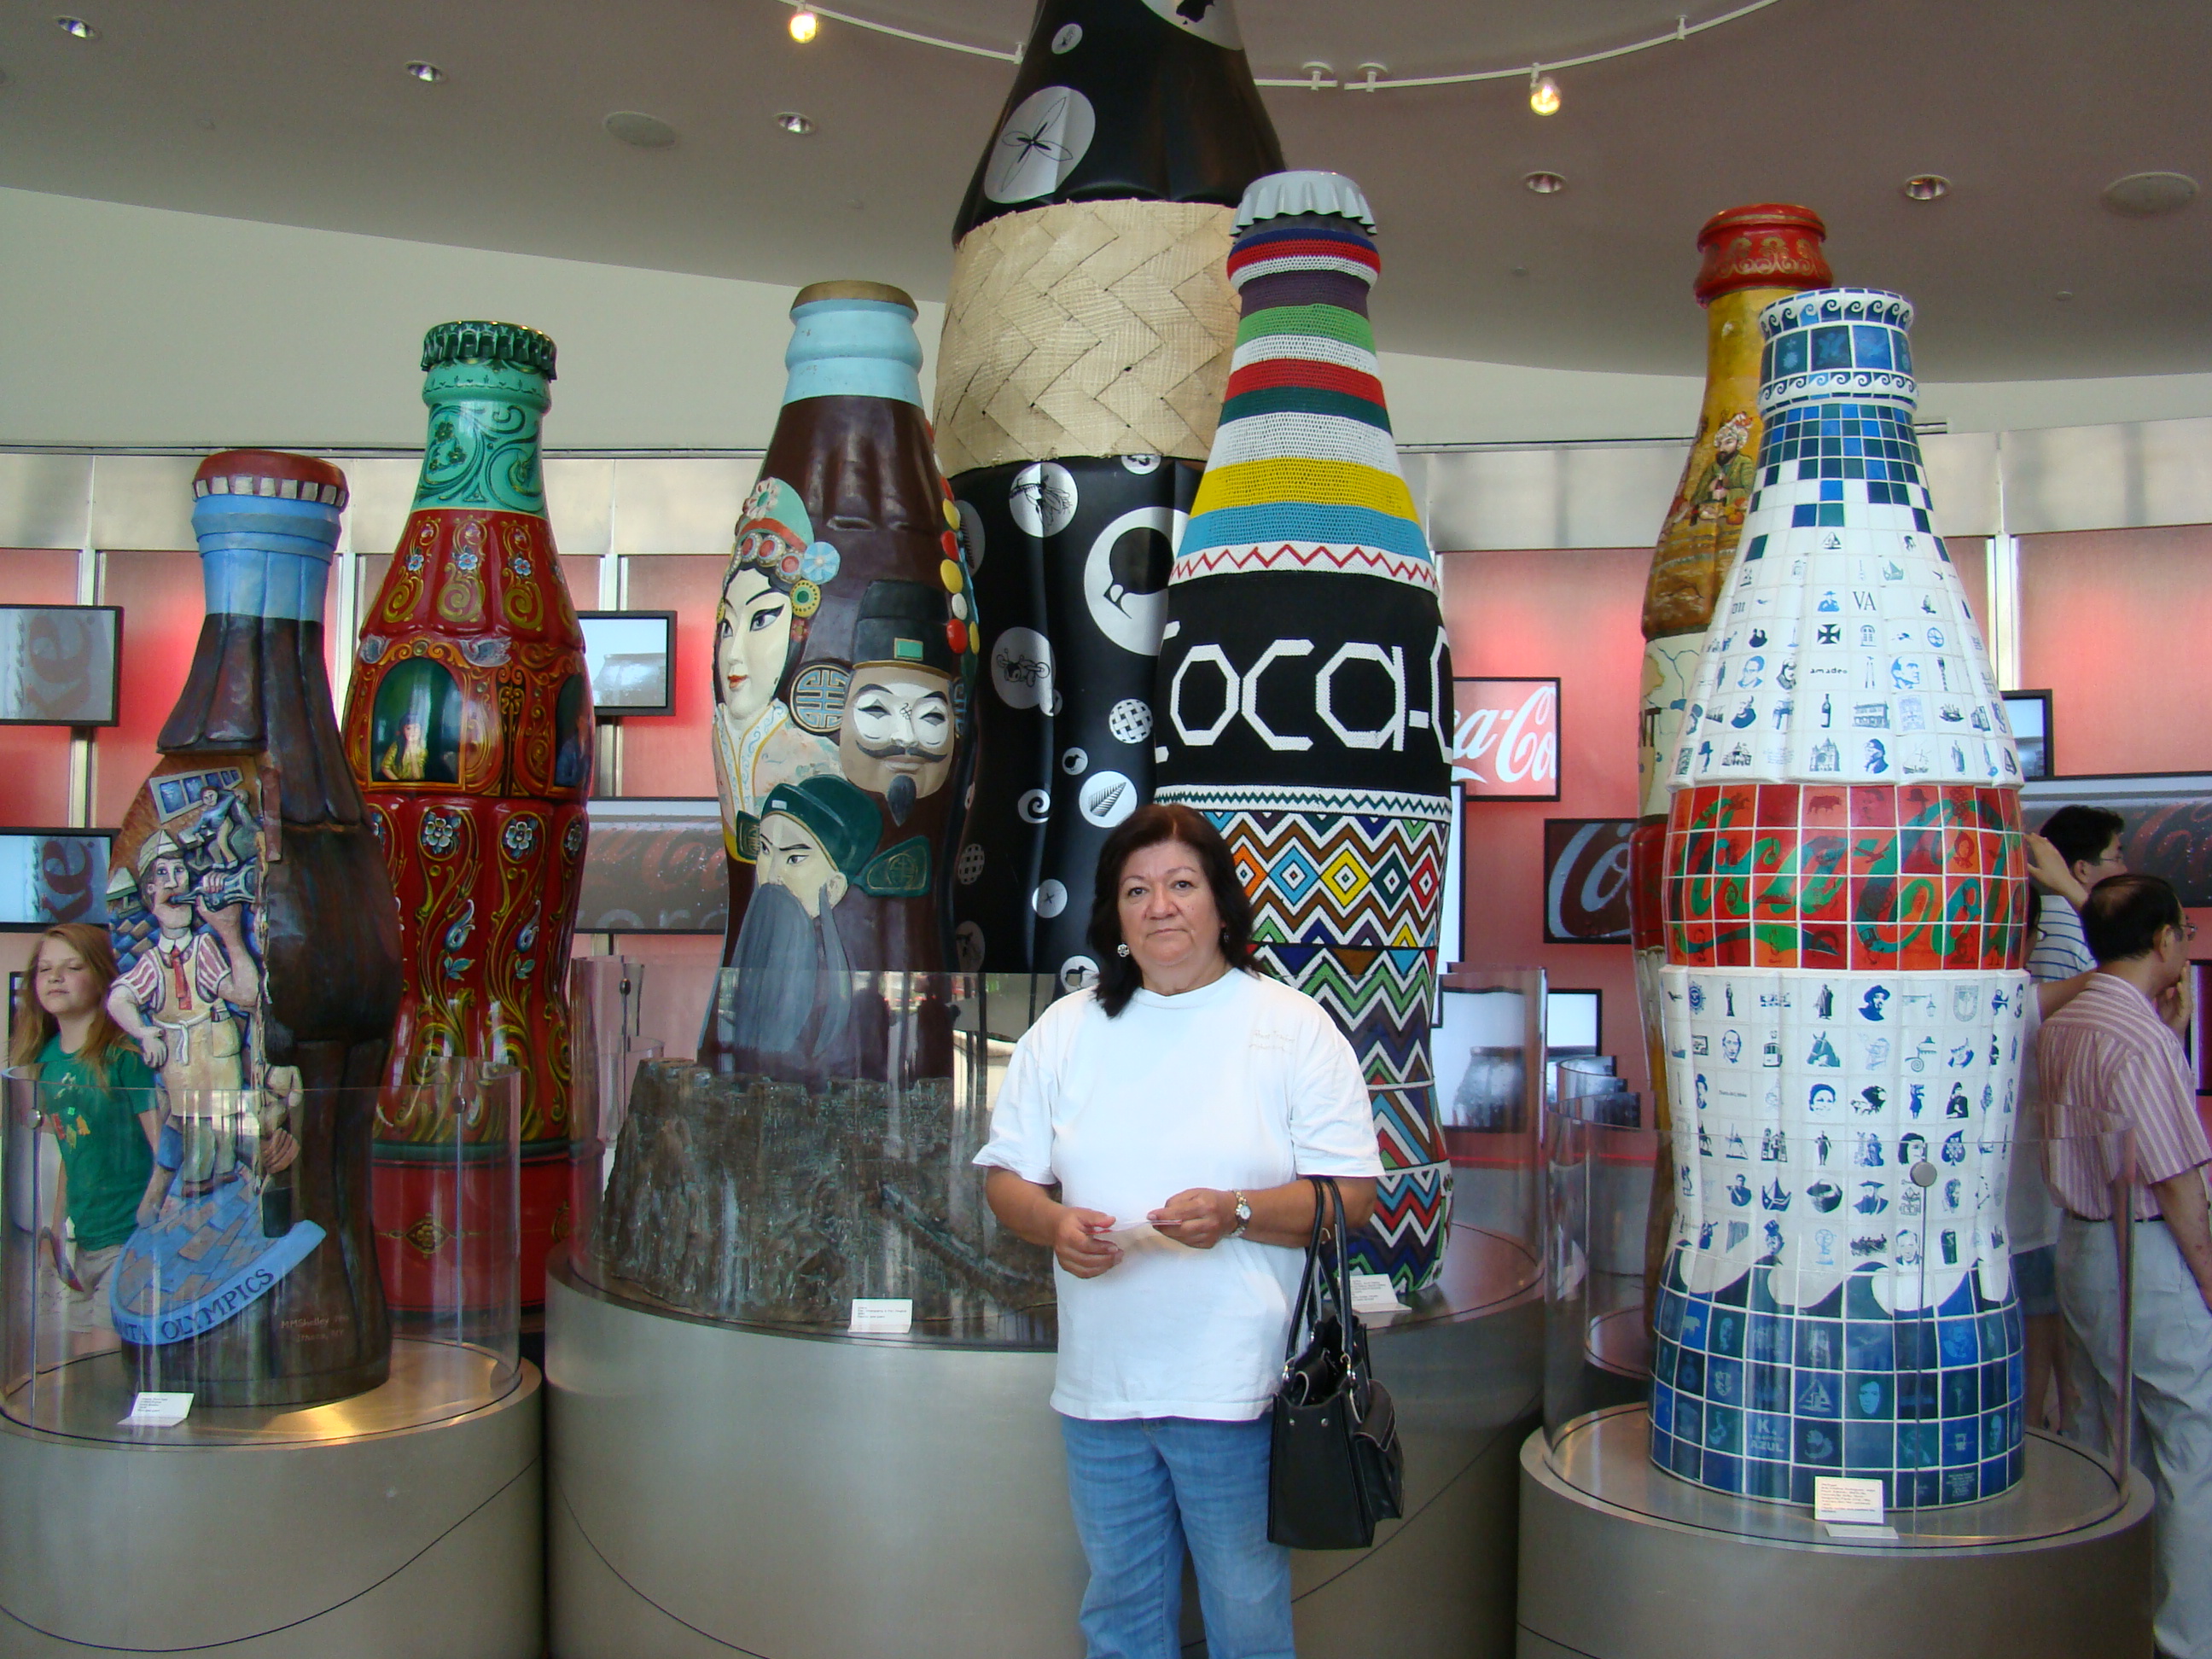 Investigating in Atlanta, Georgia decided to stop in on the Coca-Cola factory